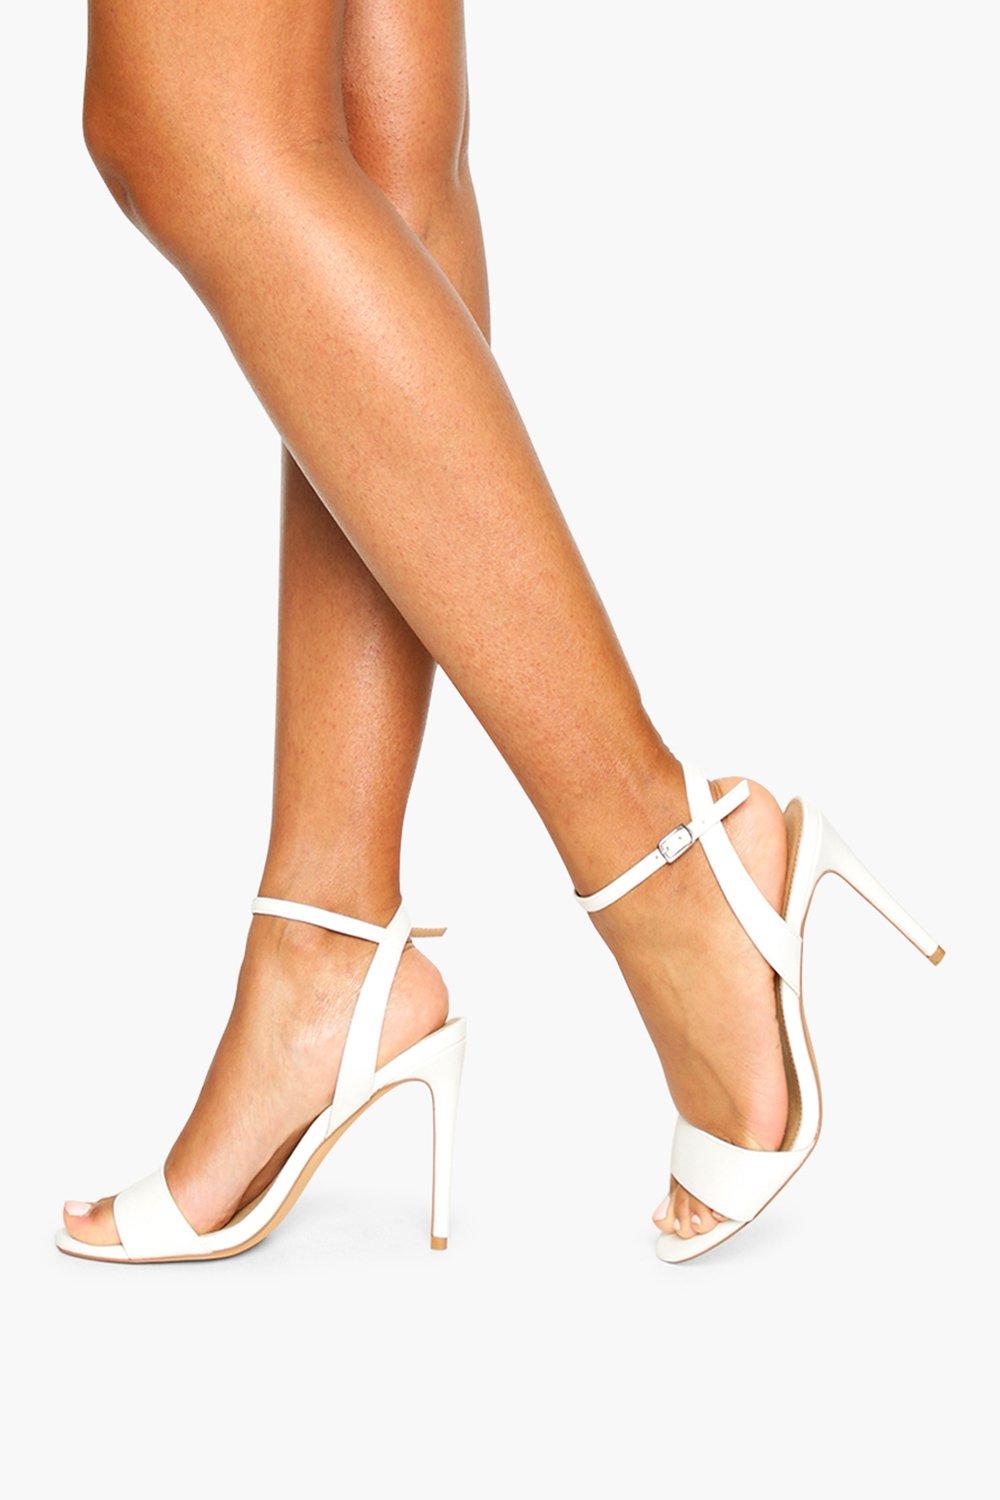 Strappy Barely There Stiletto Heels 